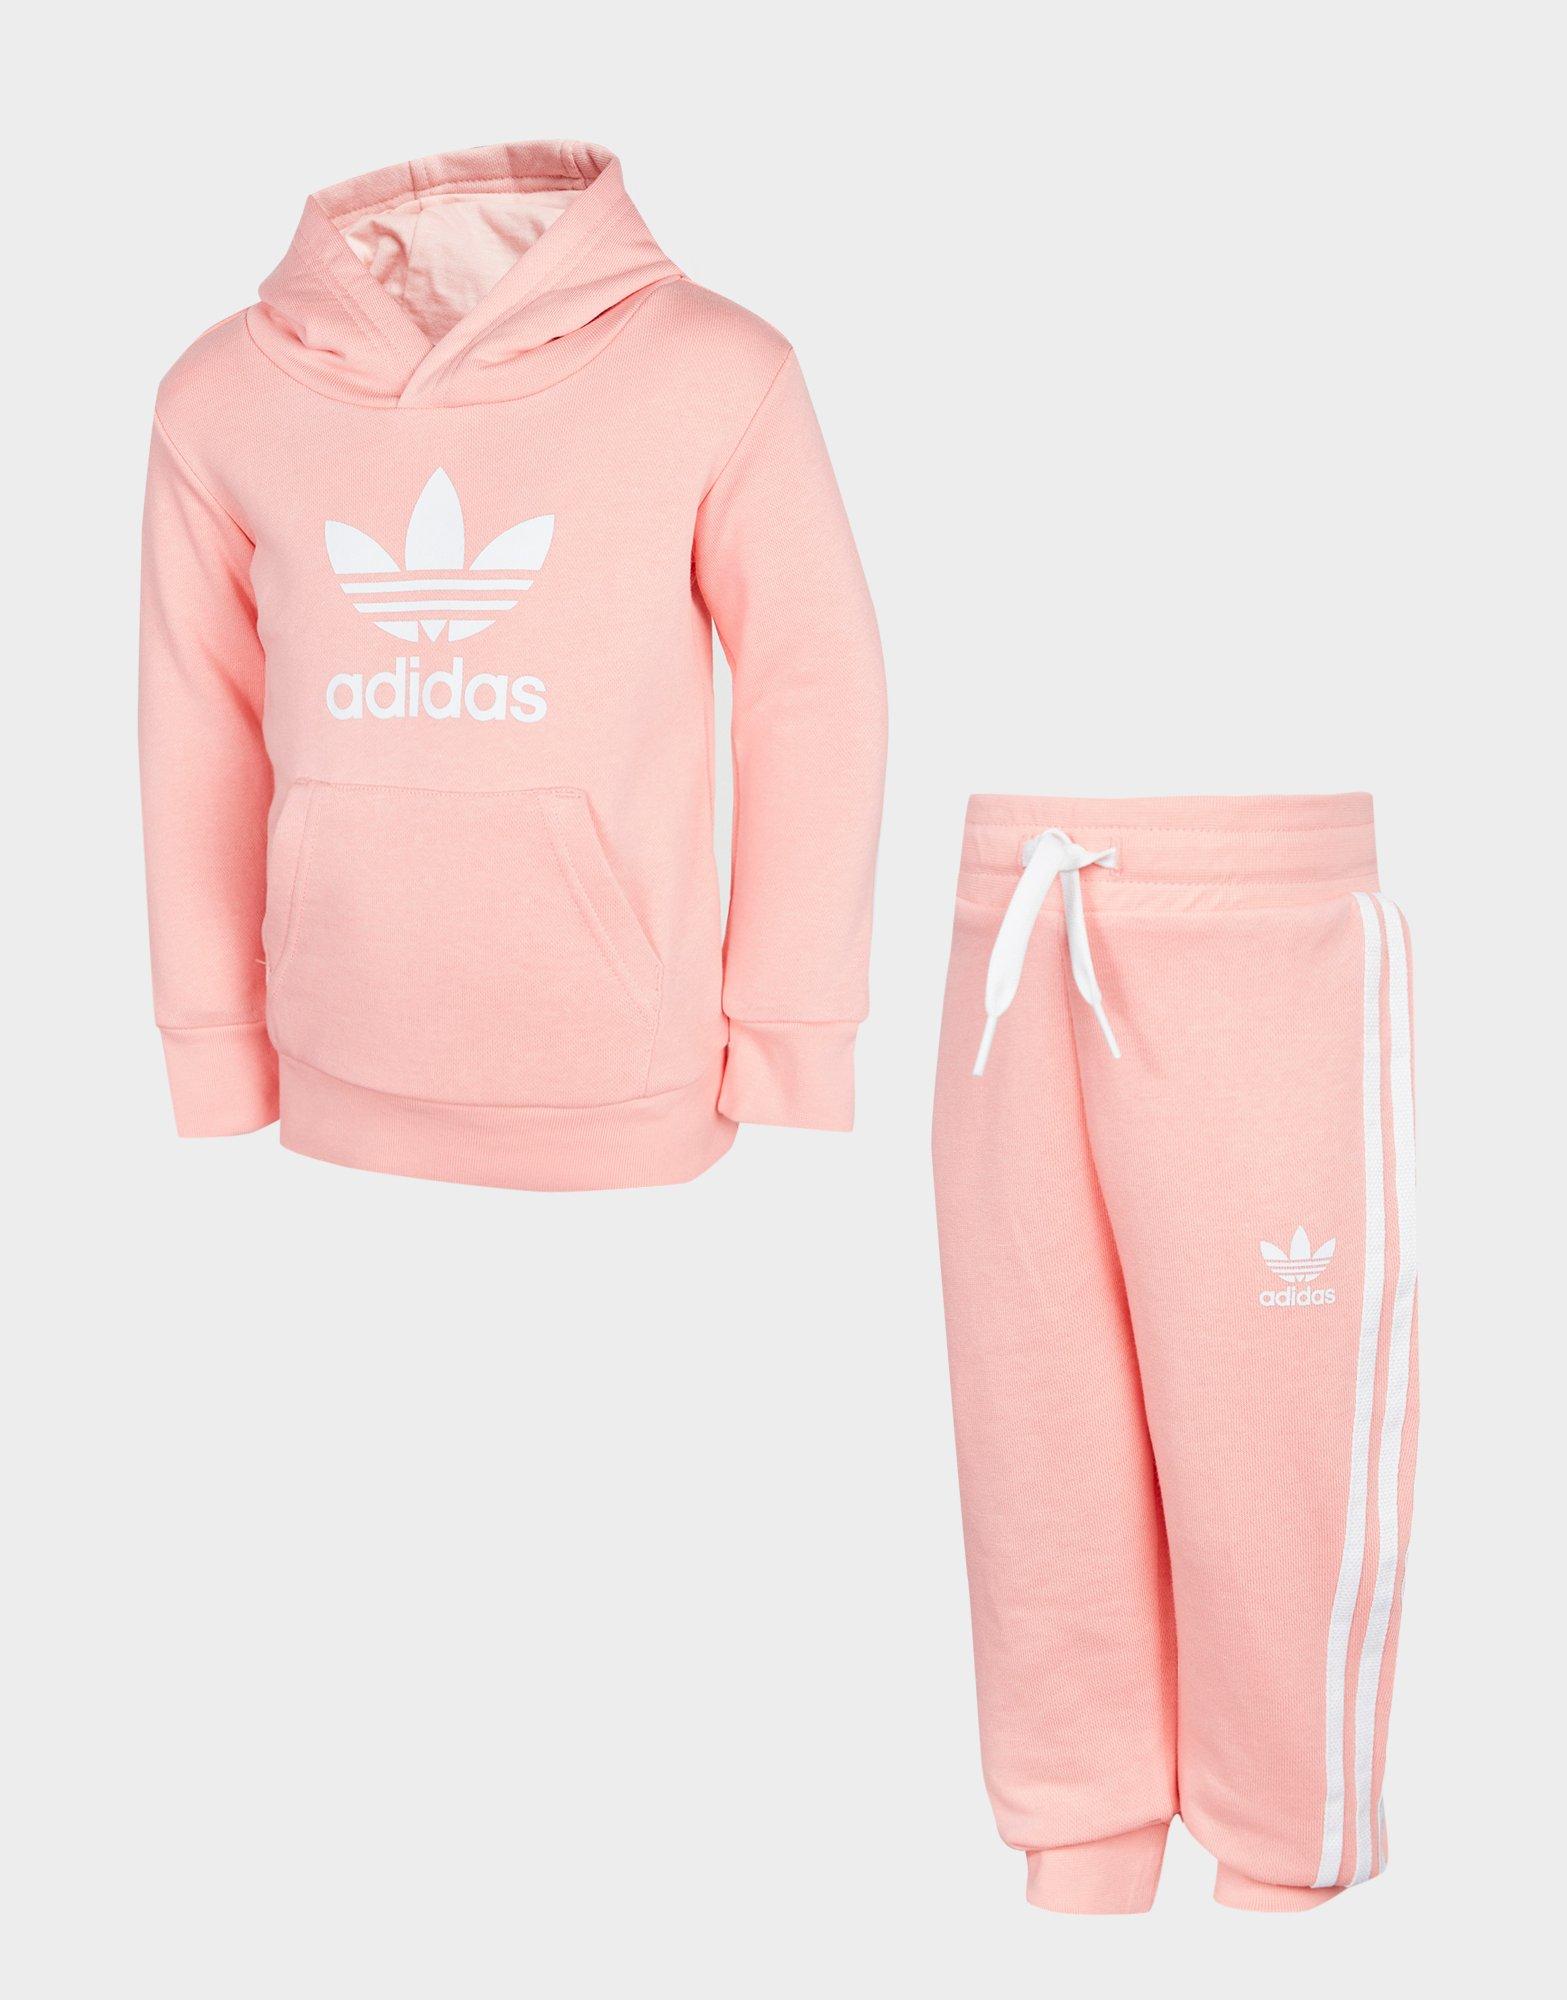 adidas sweat suits for girls